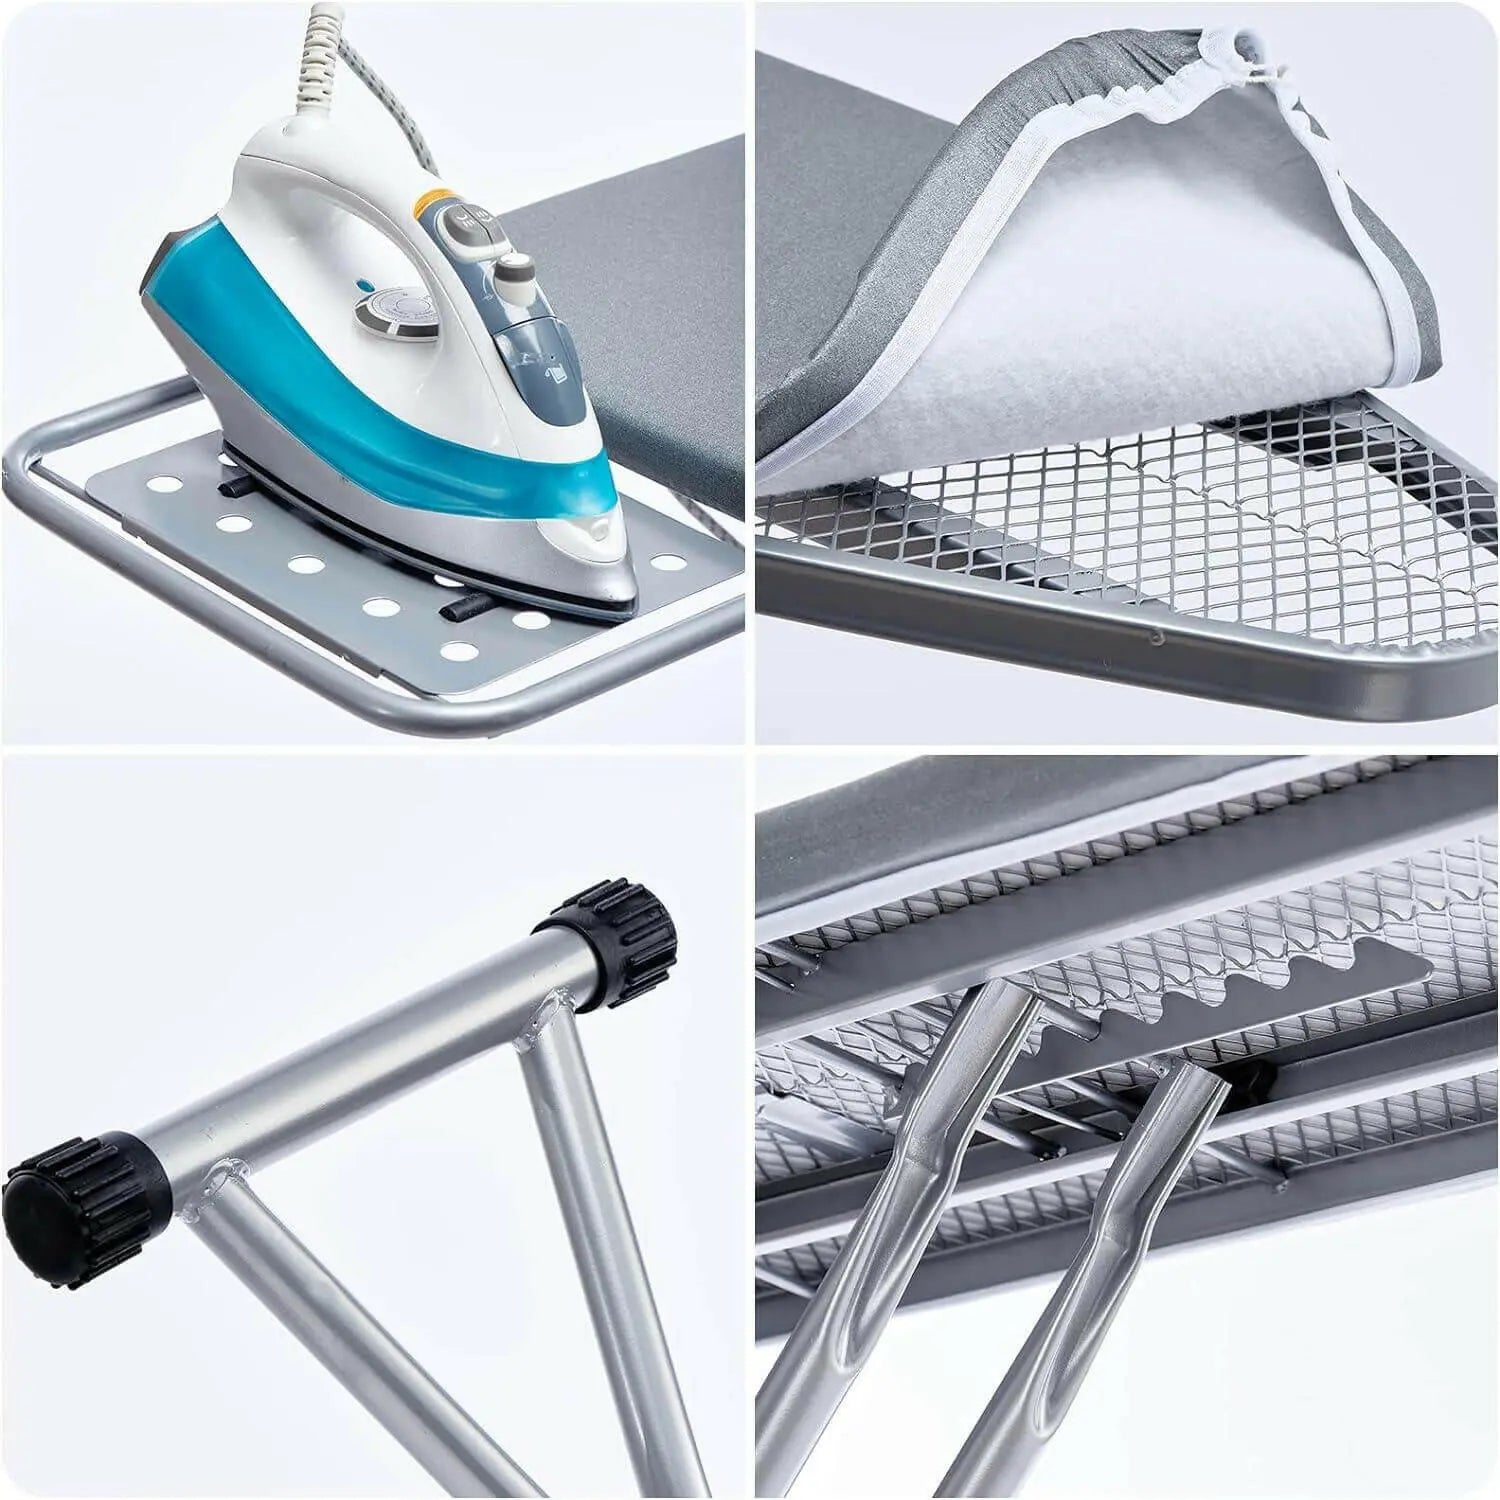 Ironing Board, Heat Resistant Cover Iron Board